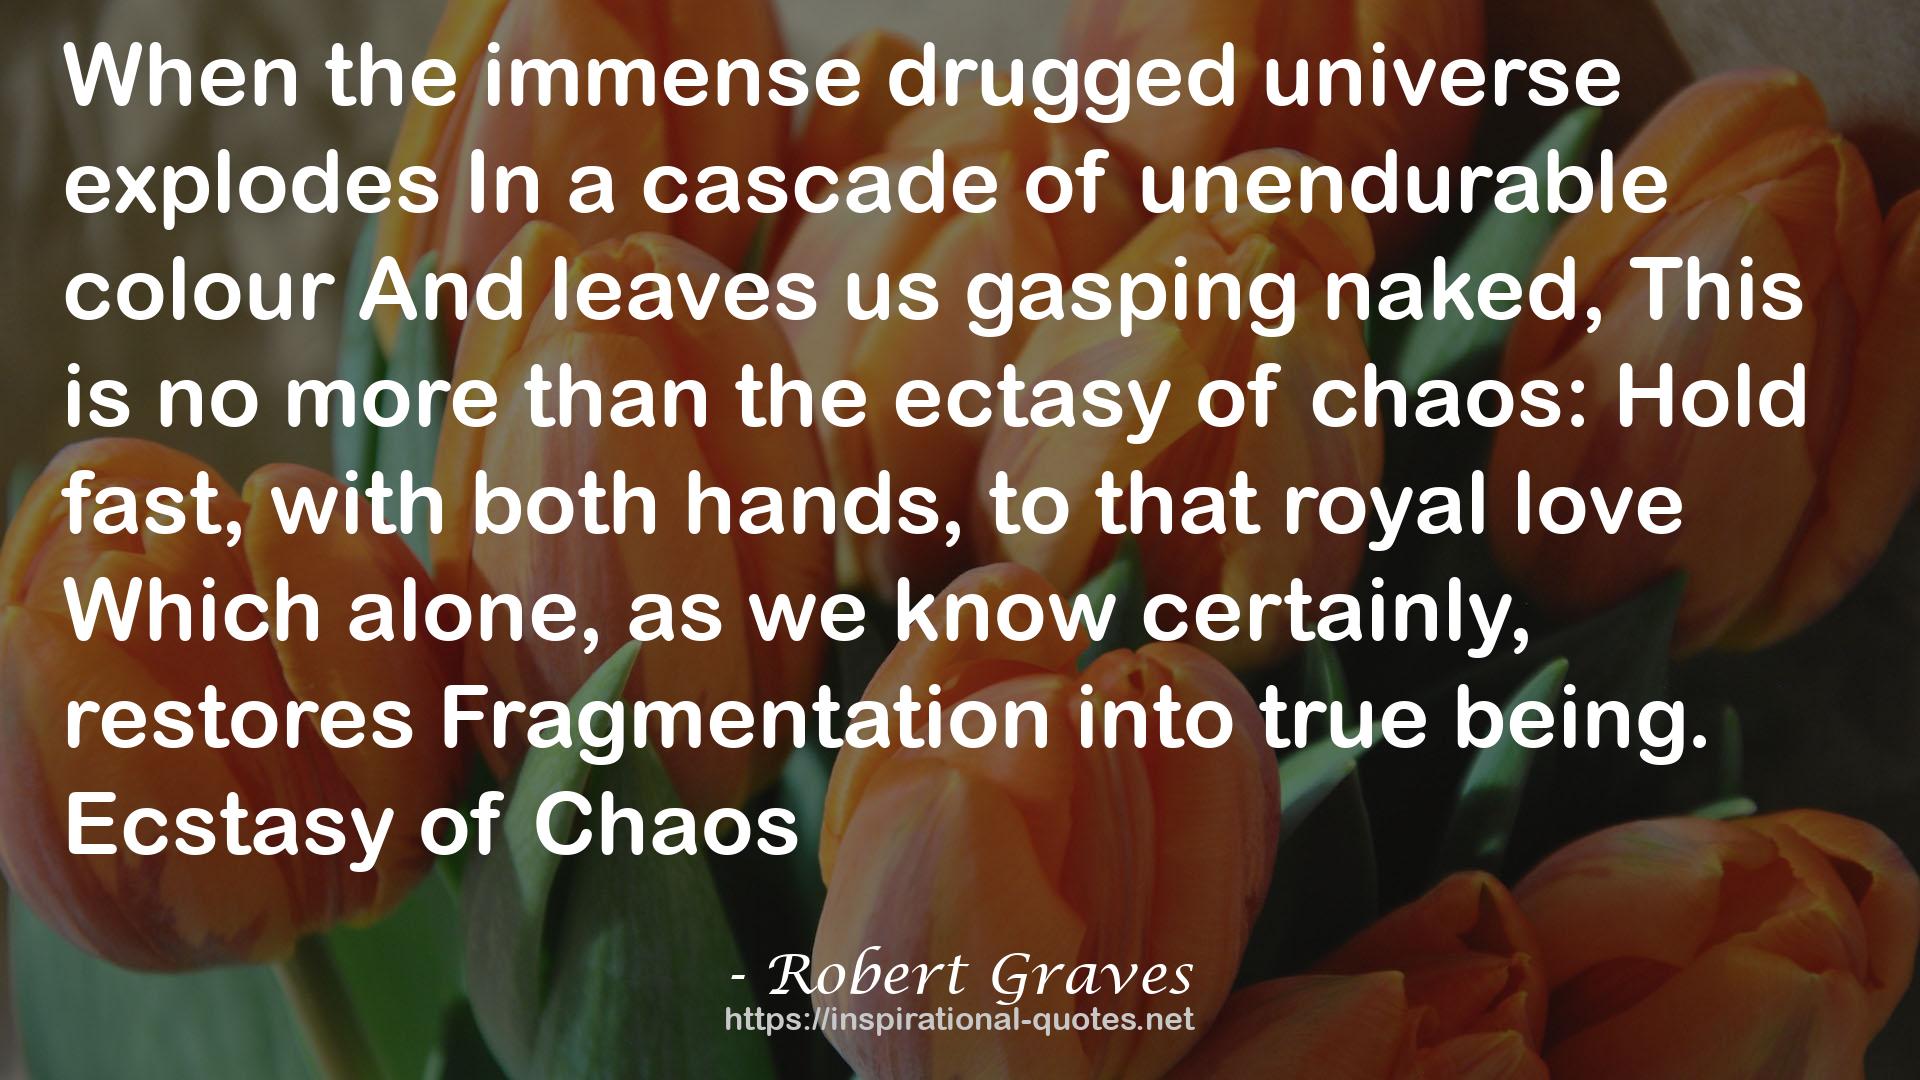 Robert Graves QUOTES